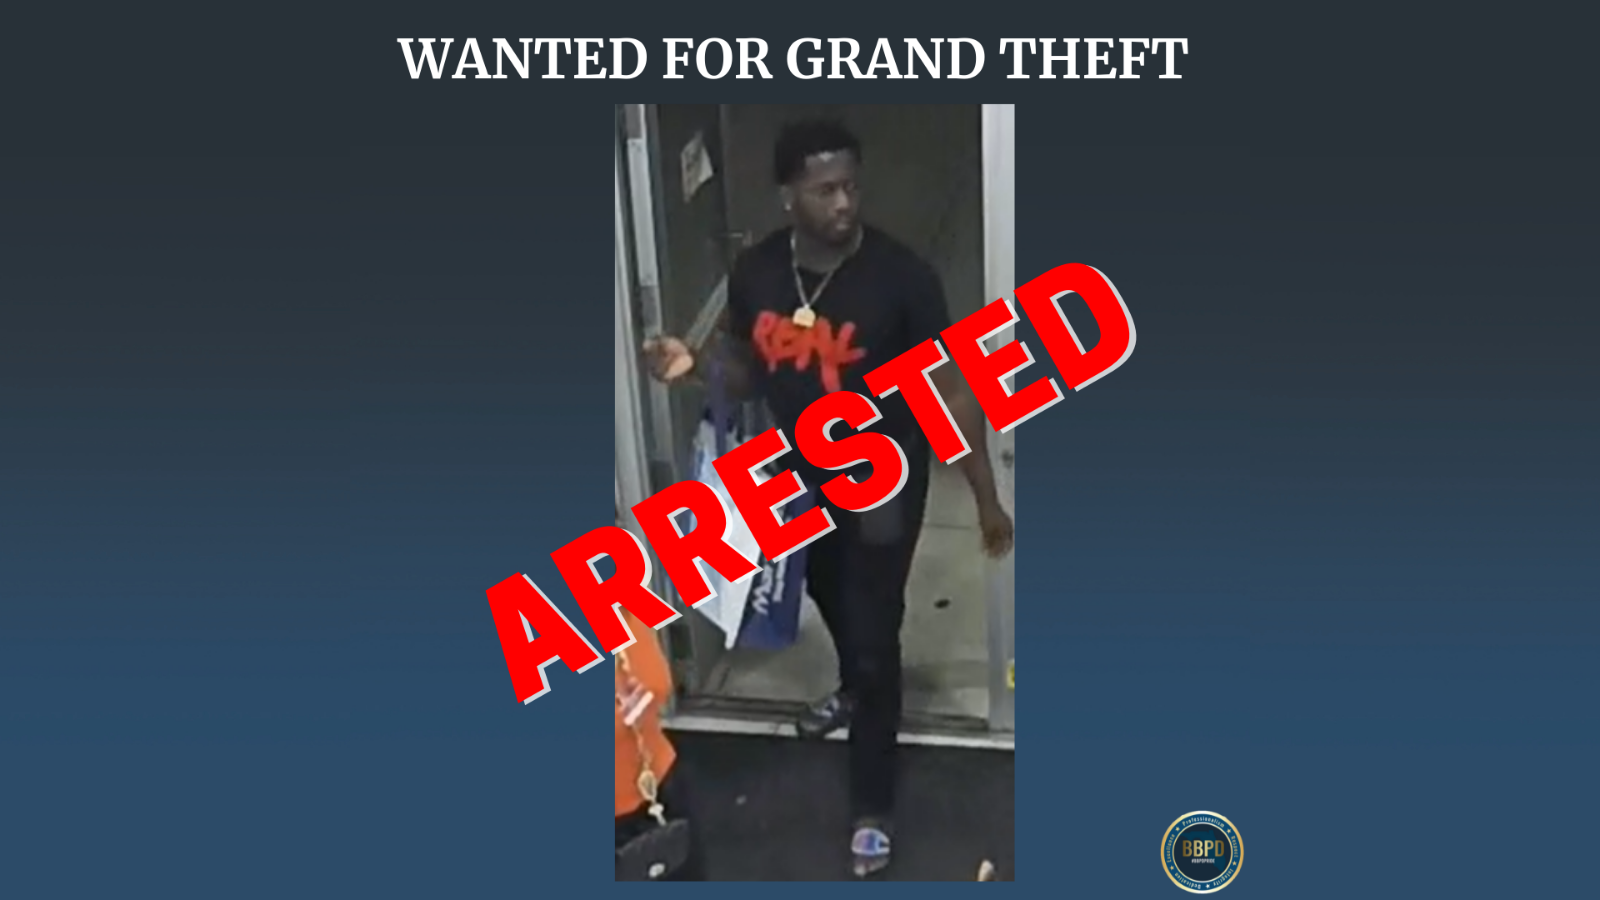 Announcement of arrest for grand theft